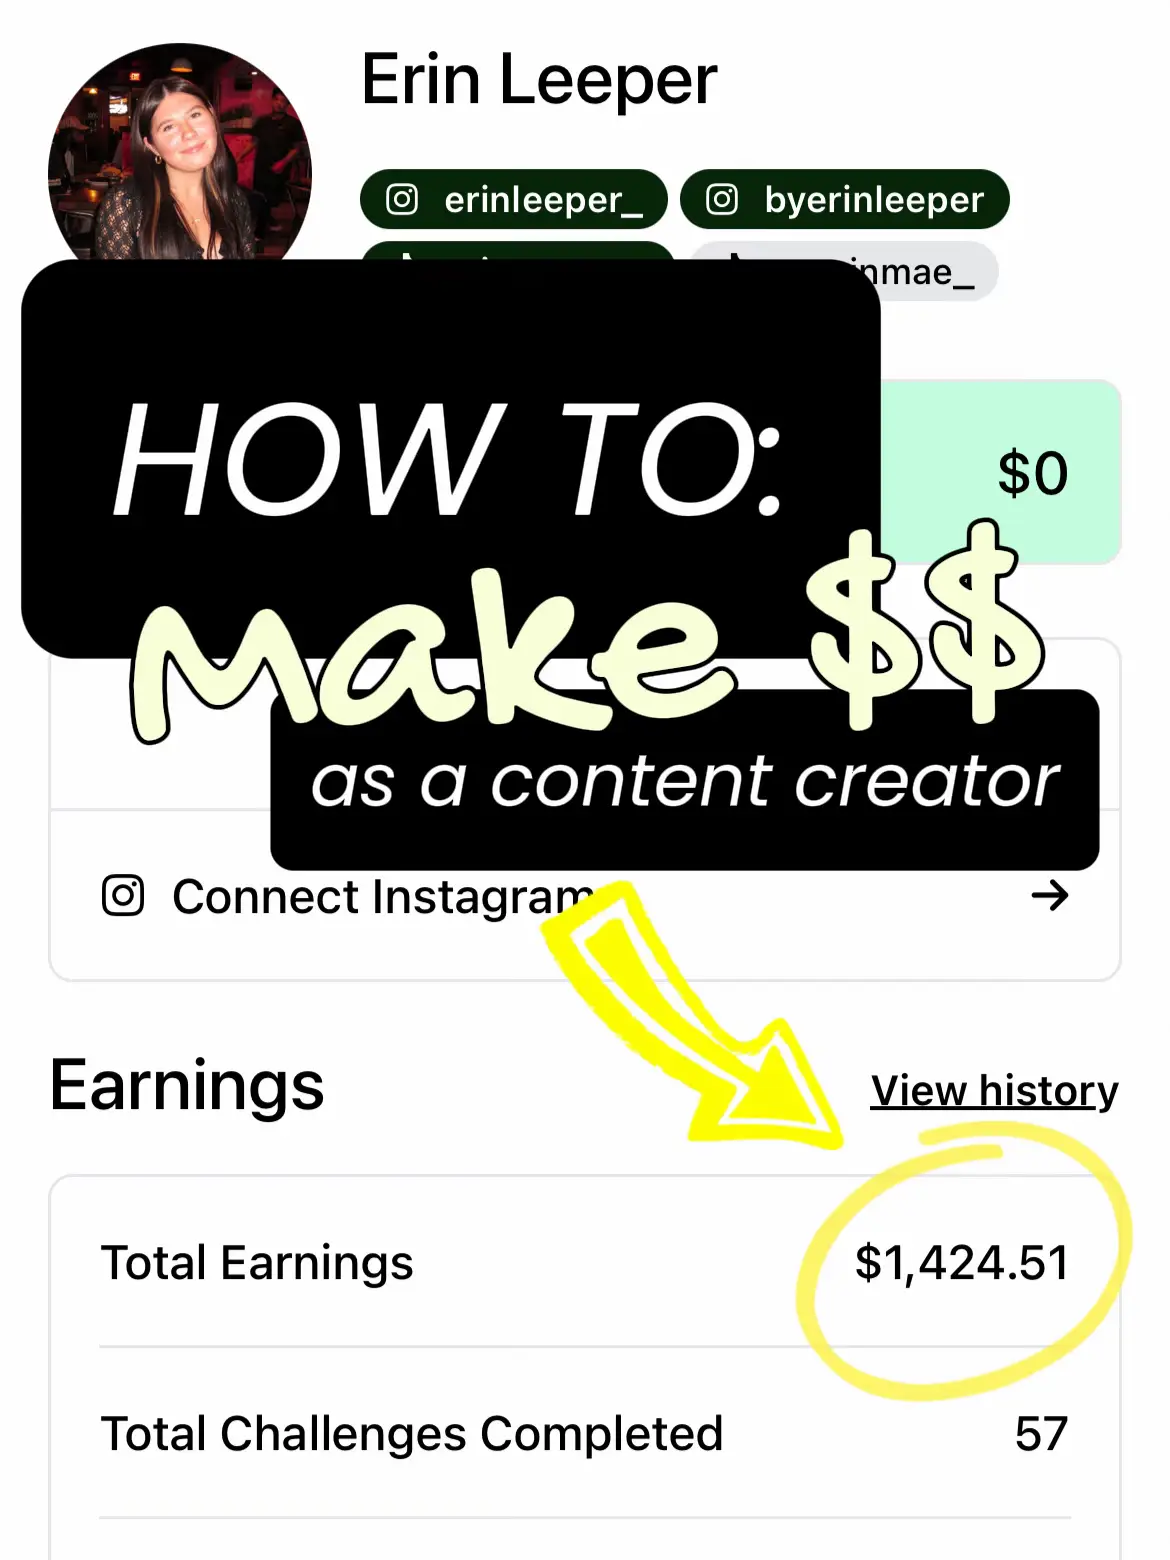 Only Profile in Upwork with more than $100k+ earnings. 🤣😂 : r/Upwork